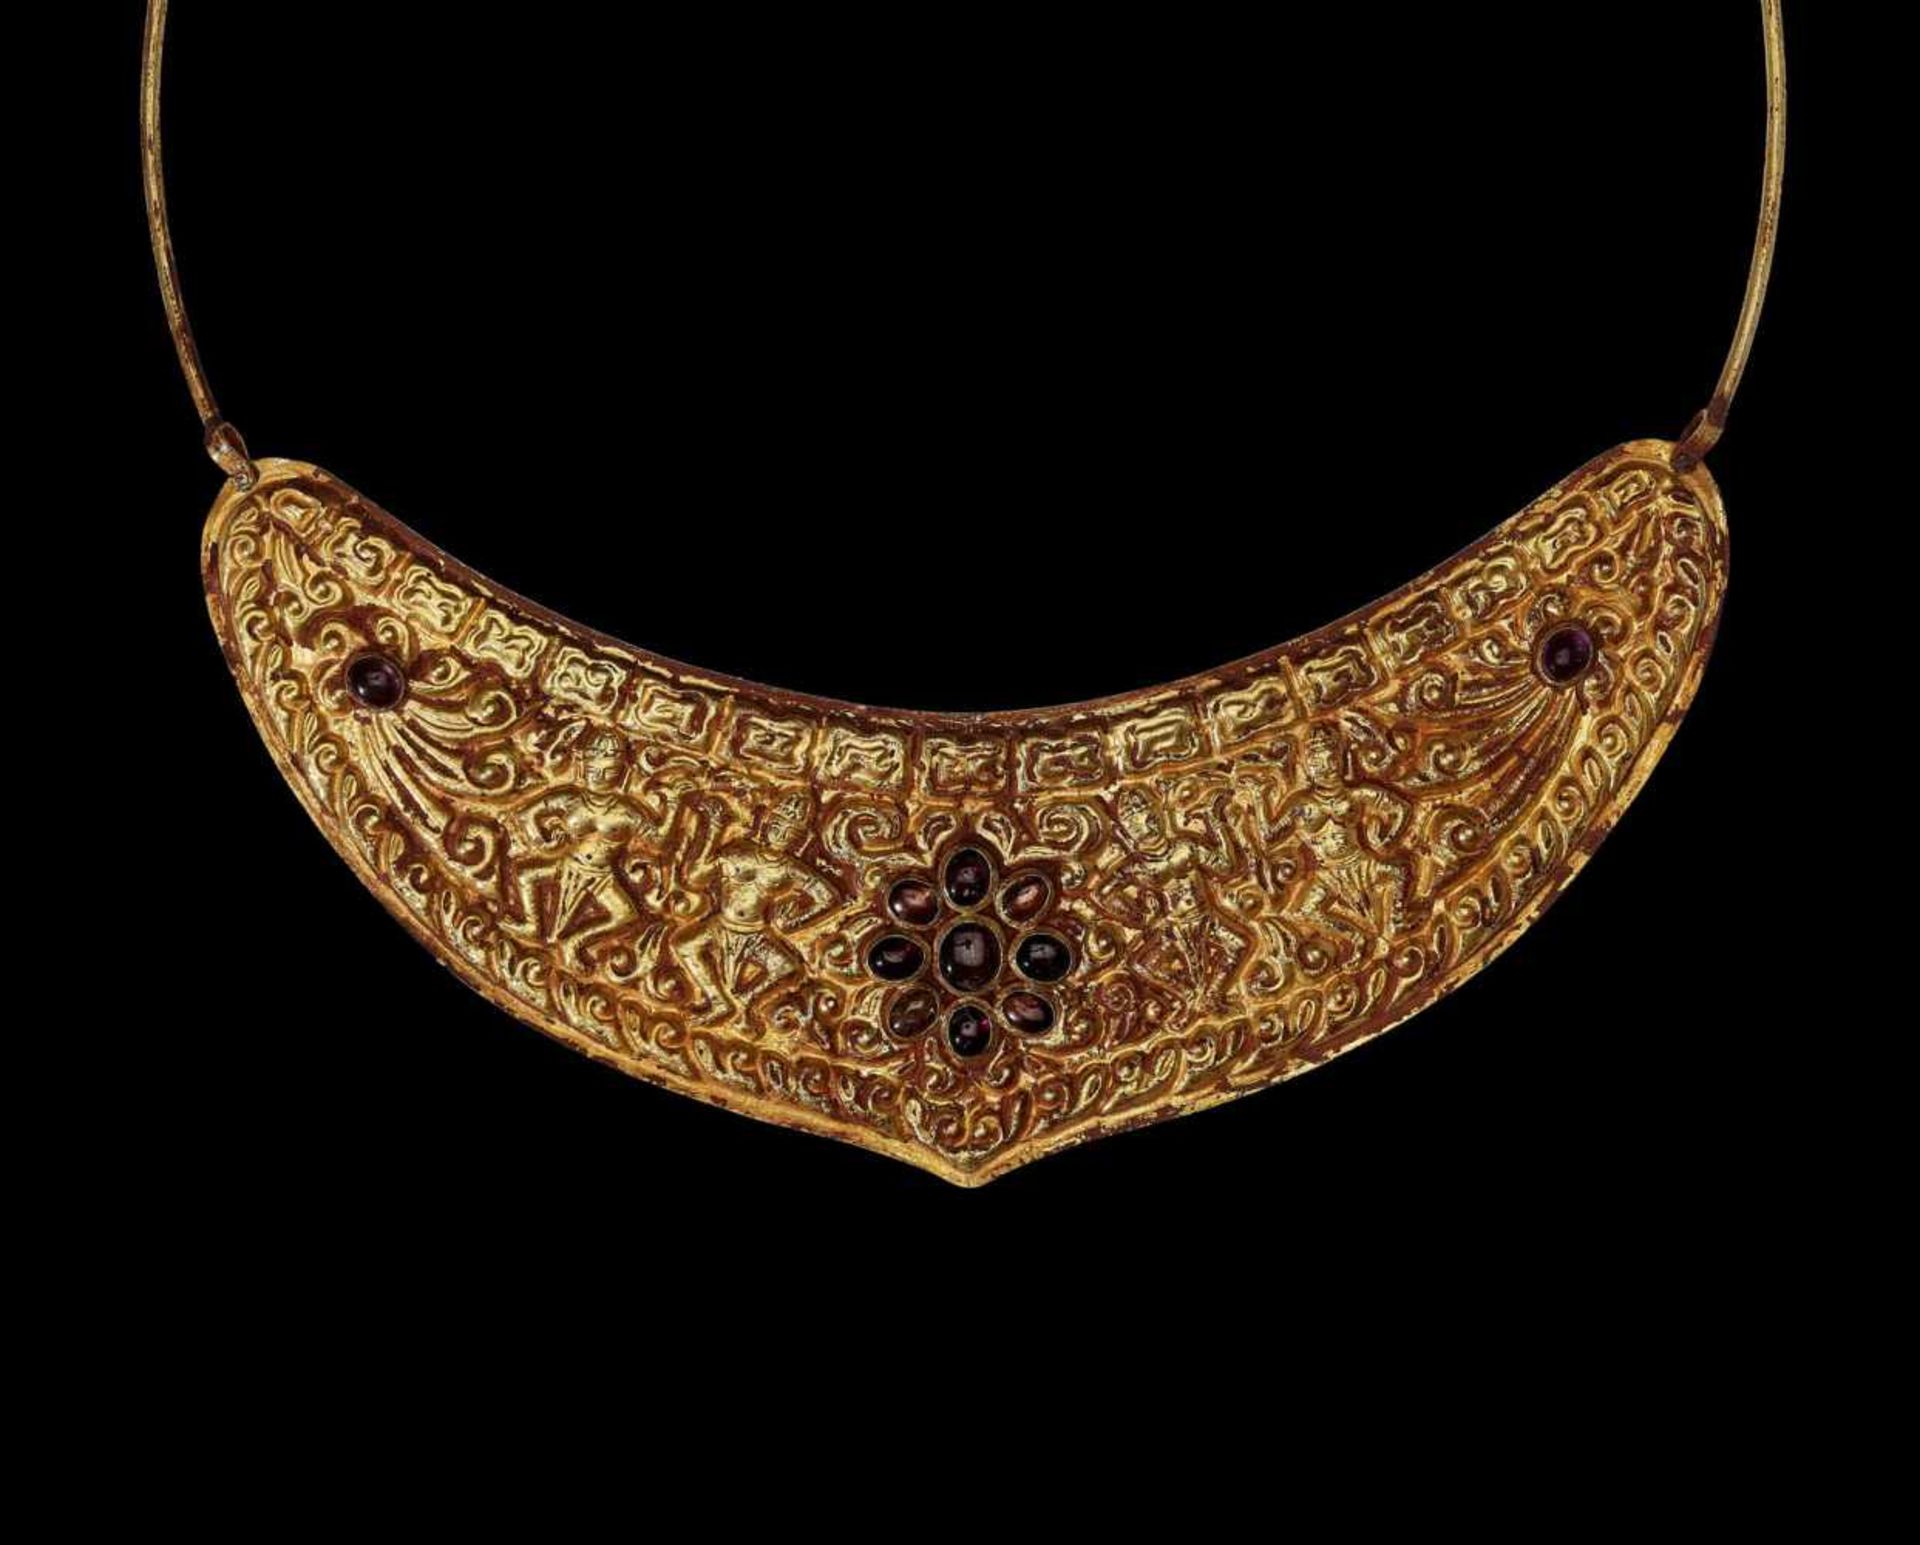 A CHAM GOLD NECKLACE WITH A CRESCENT MOON PECTORAL Central or southern Cham kingdom, period of Khmer - Image 4 of 5